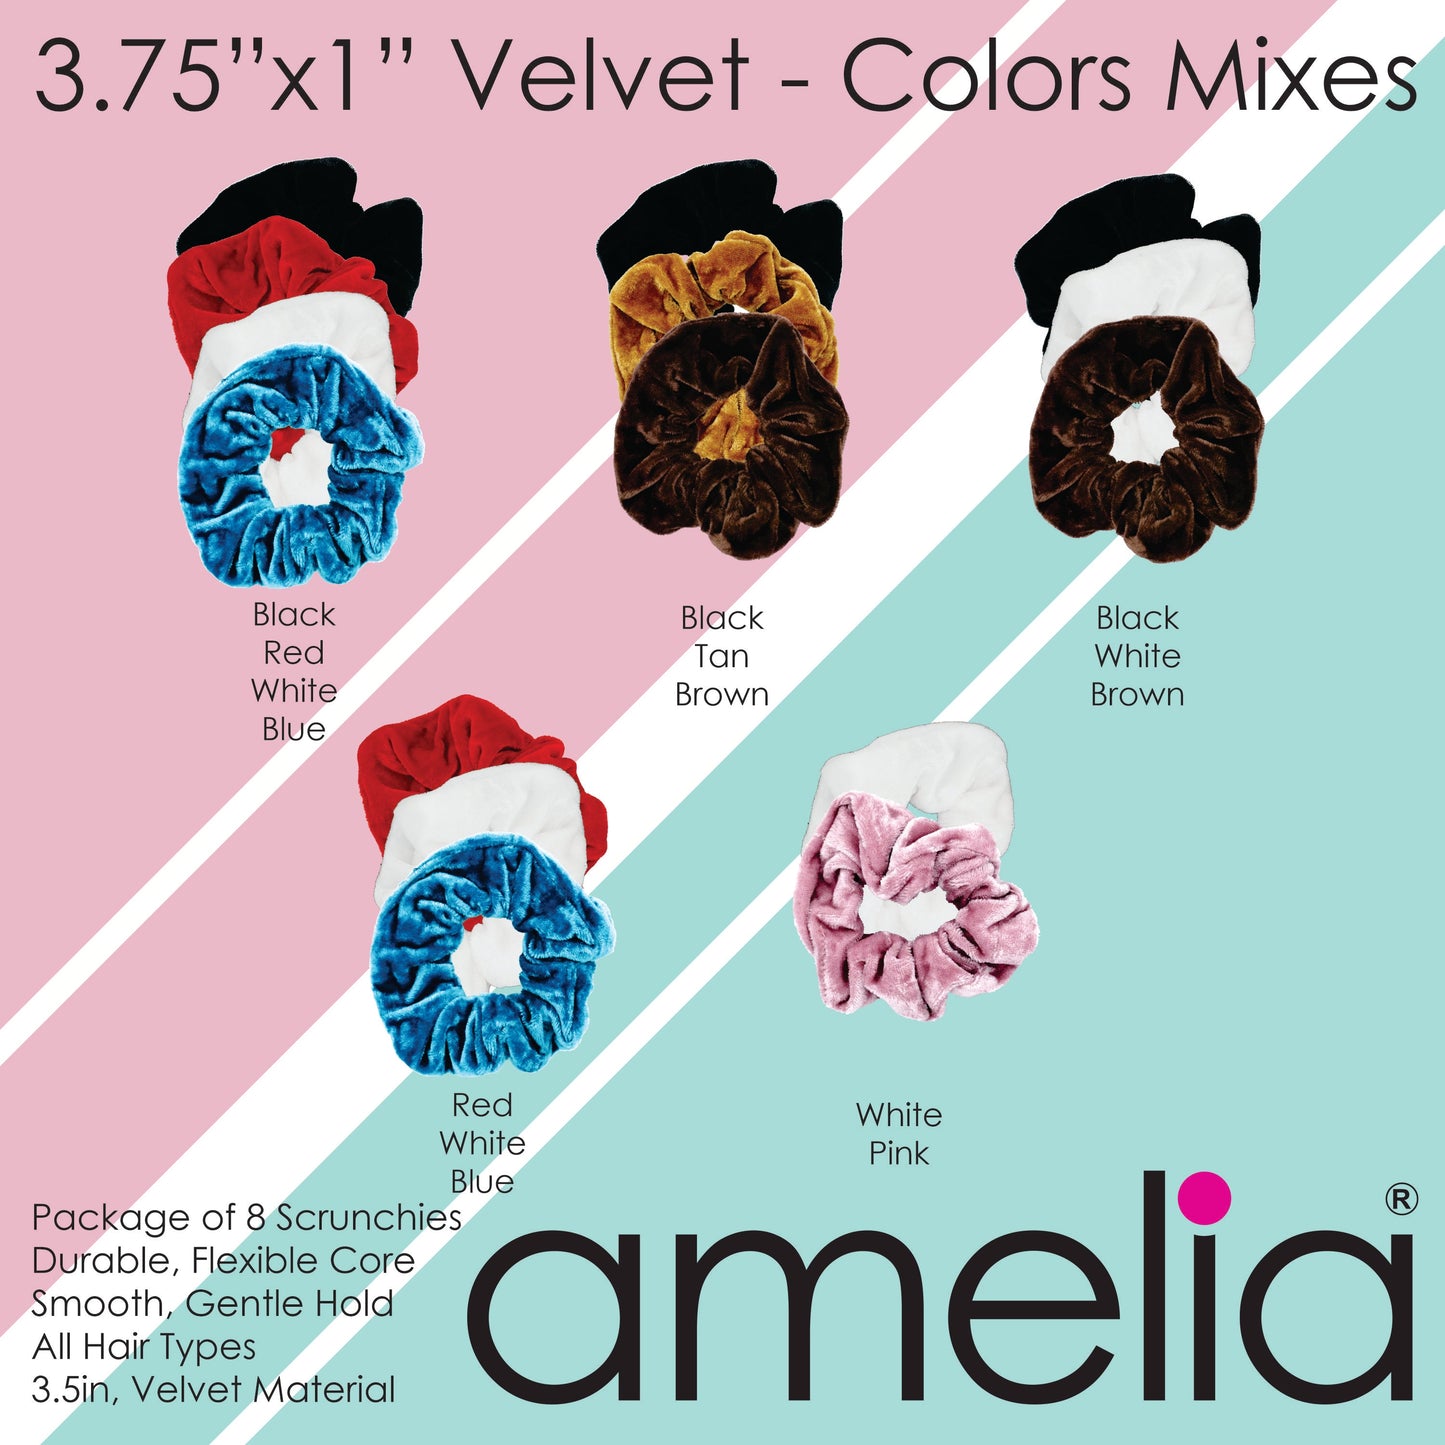 Amelia Beauty Products, White Velvet Velvet Scrunchies, 3.5in Diameter, Gentle on Hair, Strong Hold, No Snag, No Dents or Creases. 8 Pack - 12 Retail Packs